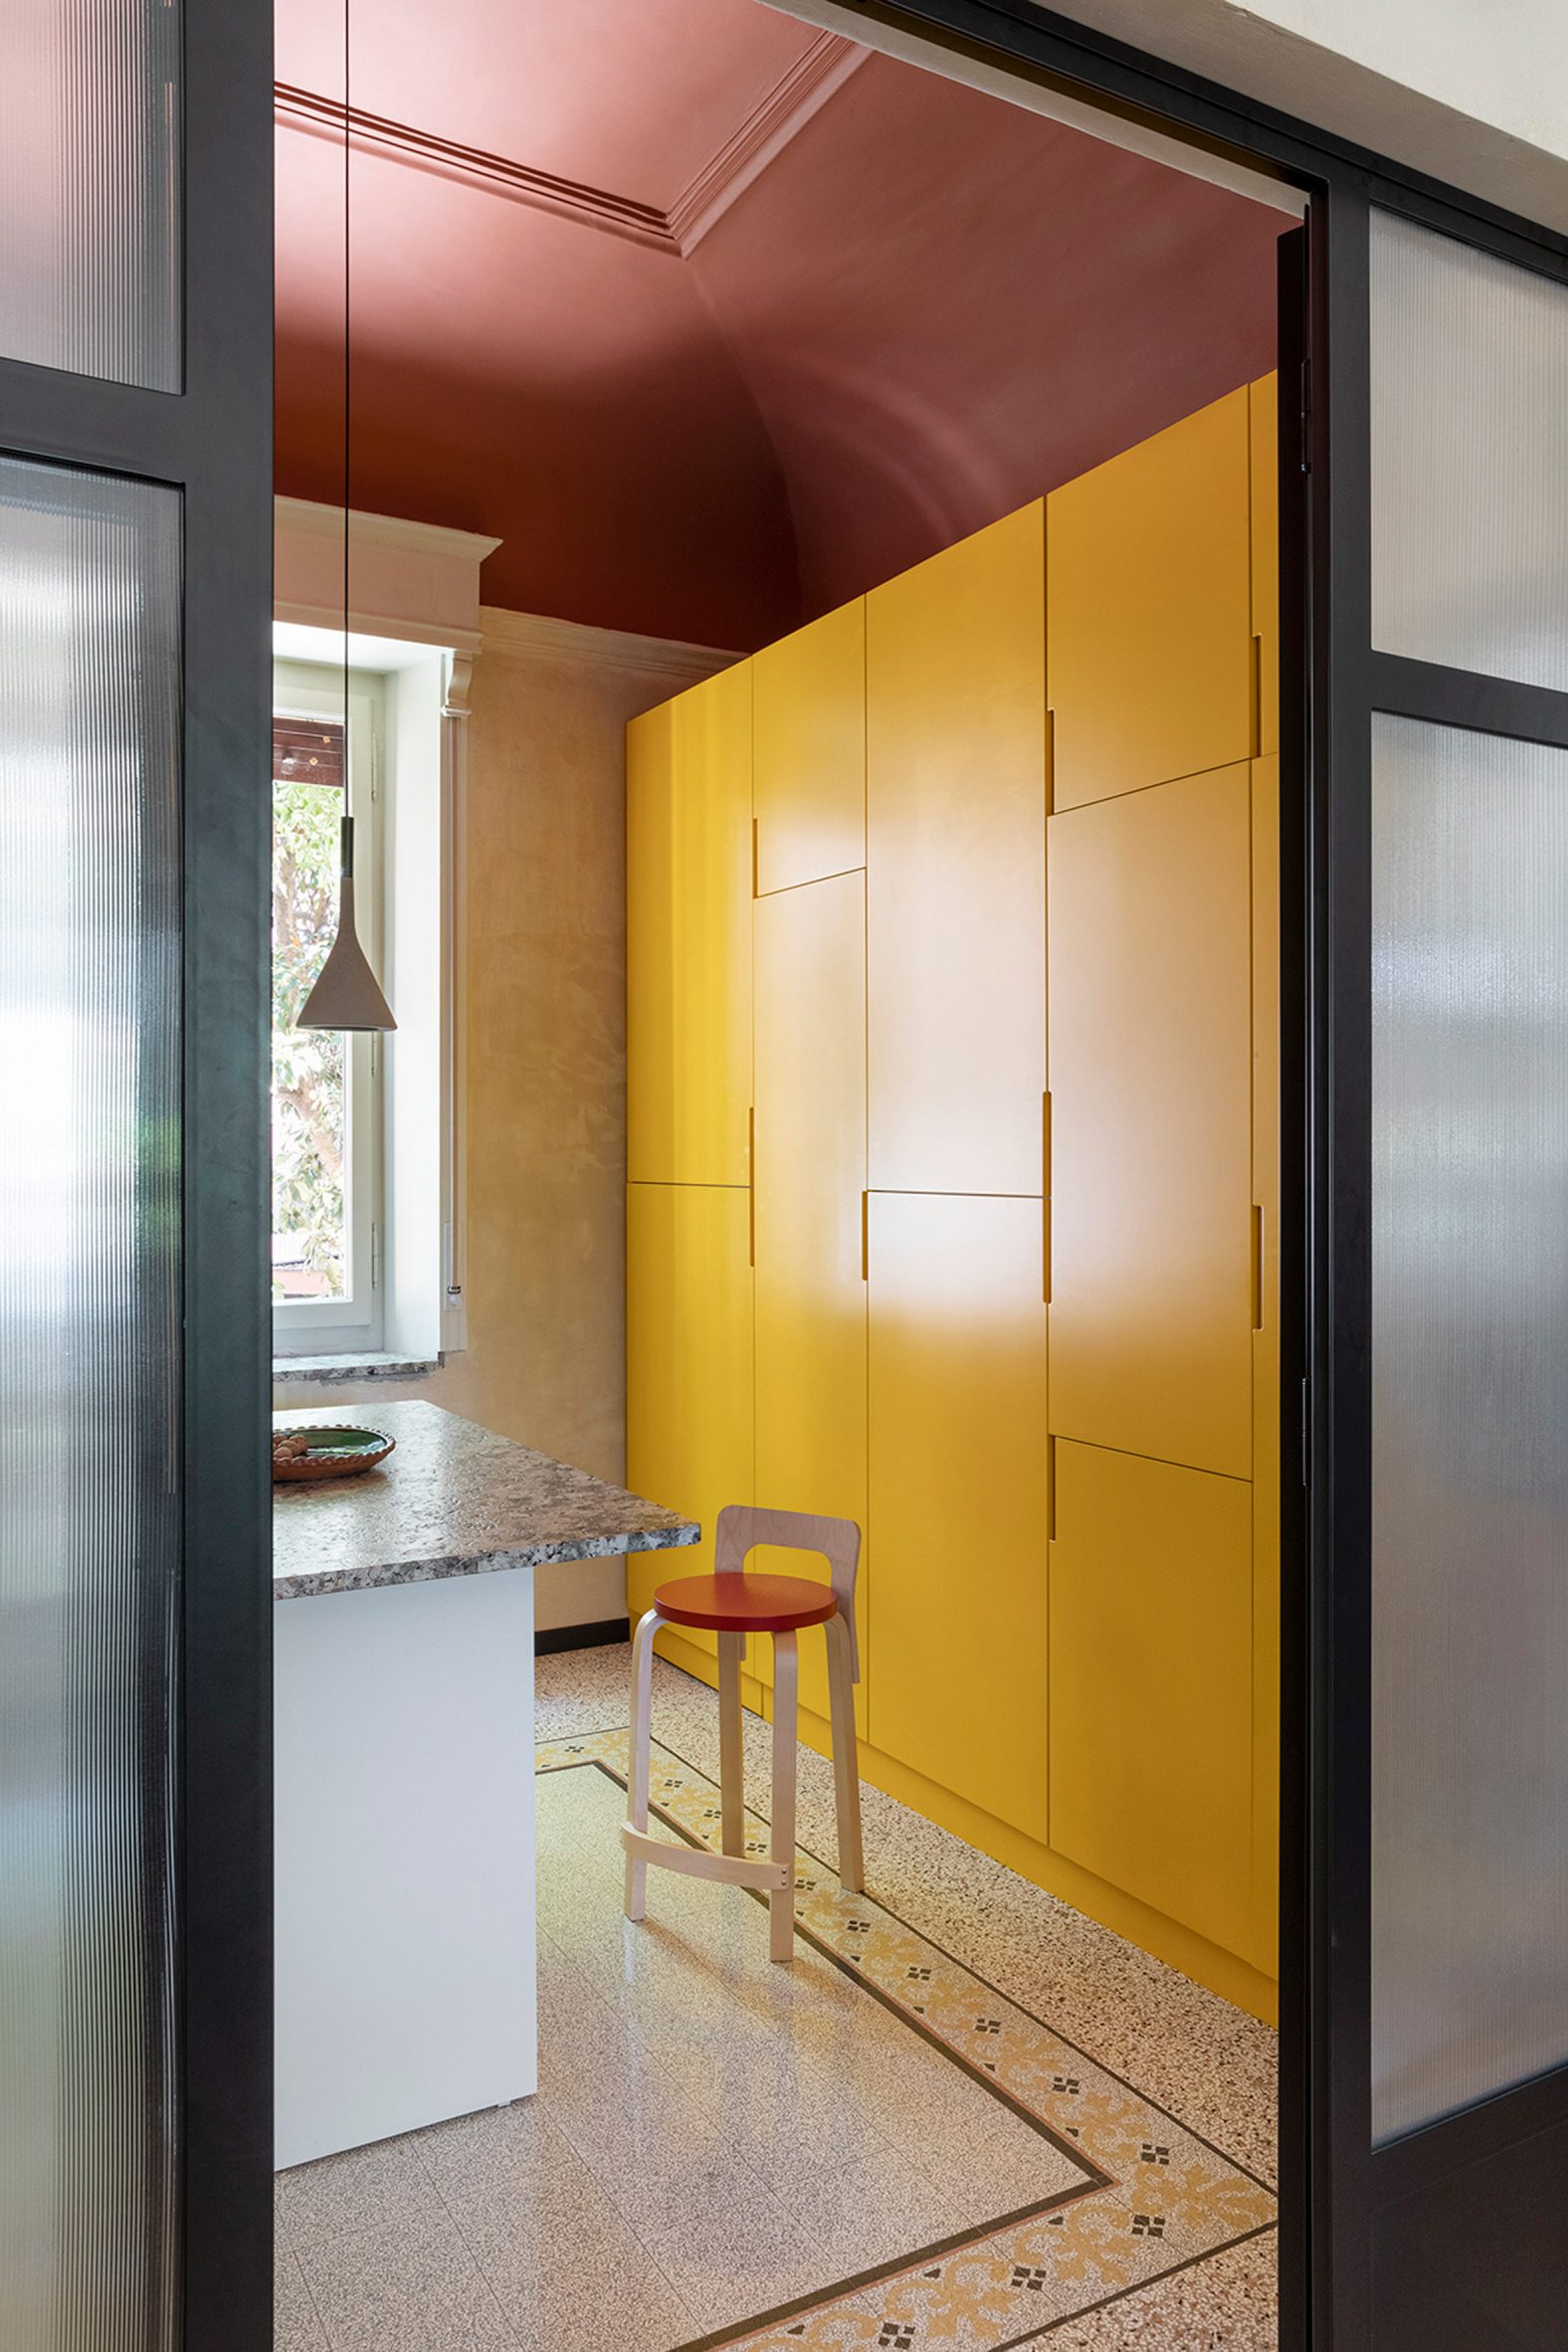 Kitchen with terracotta red ceiling and yellow wall units